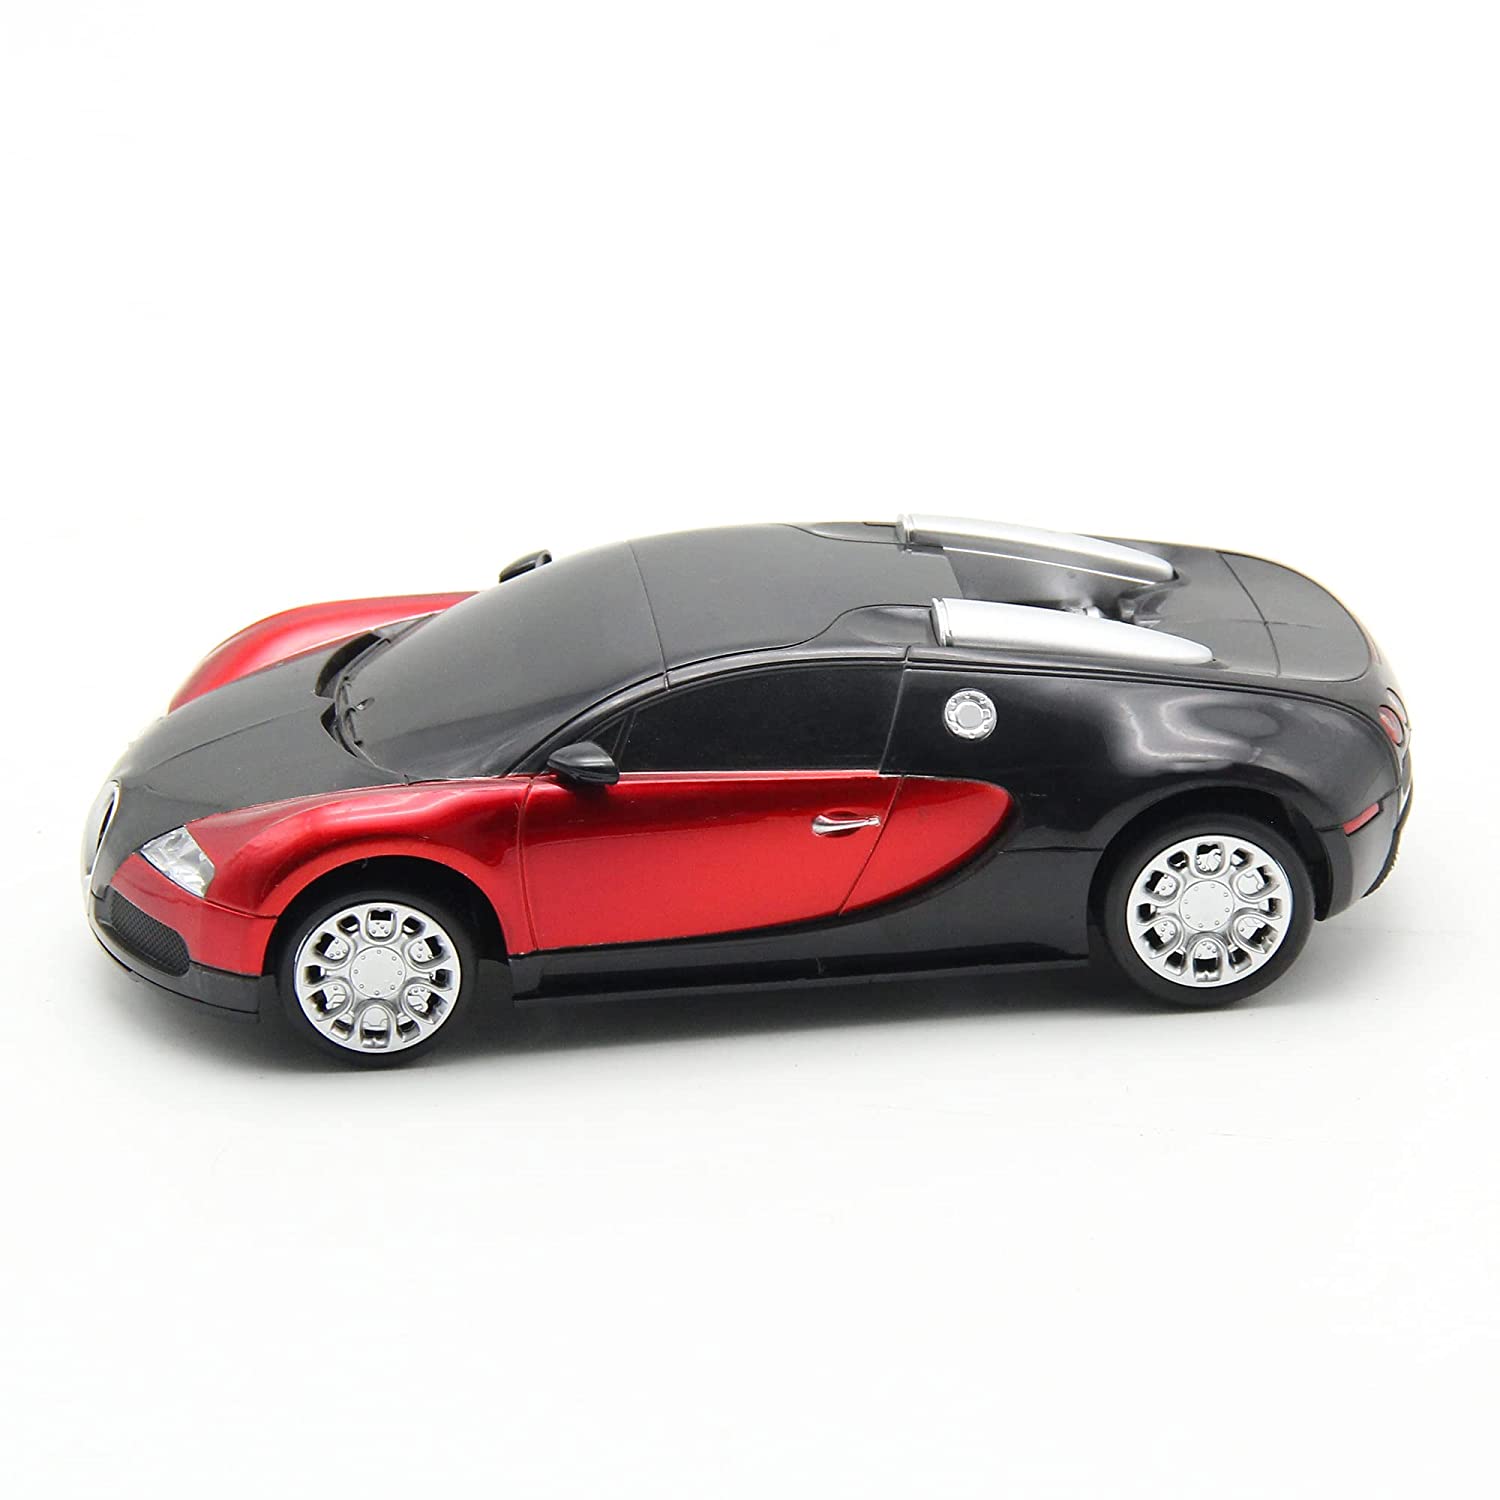 Playzu R/C 1:24 Scale Sports Vehicle, Red & Black - Remote Control Car for Kids Ages 6+